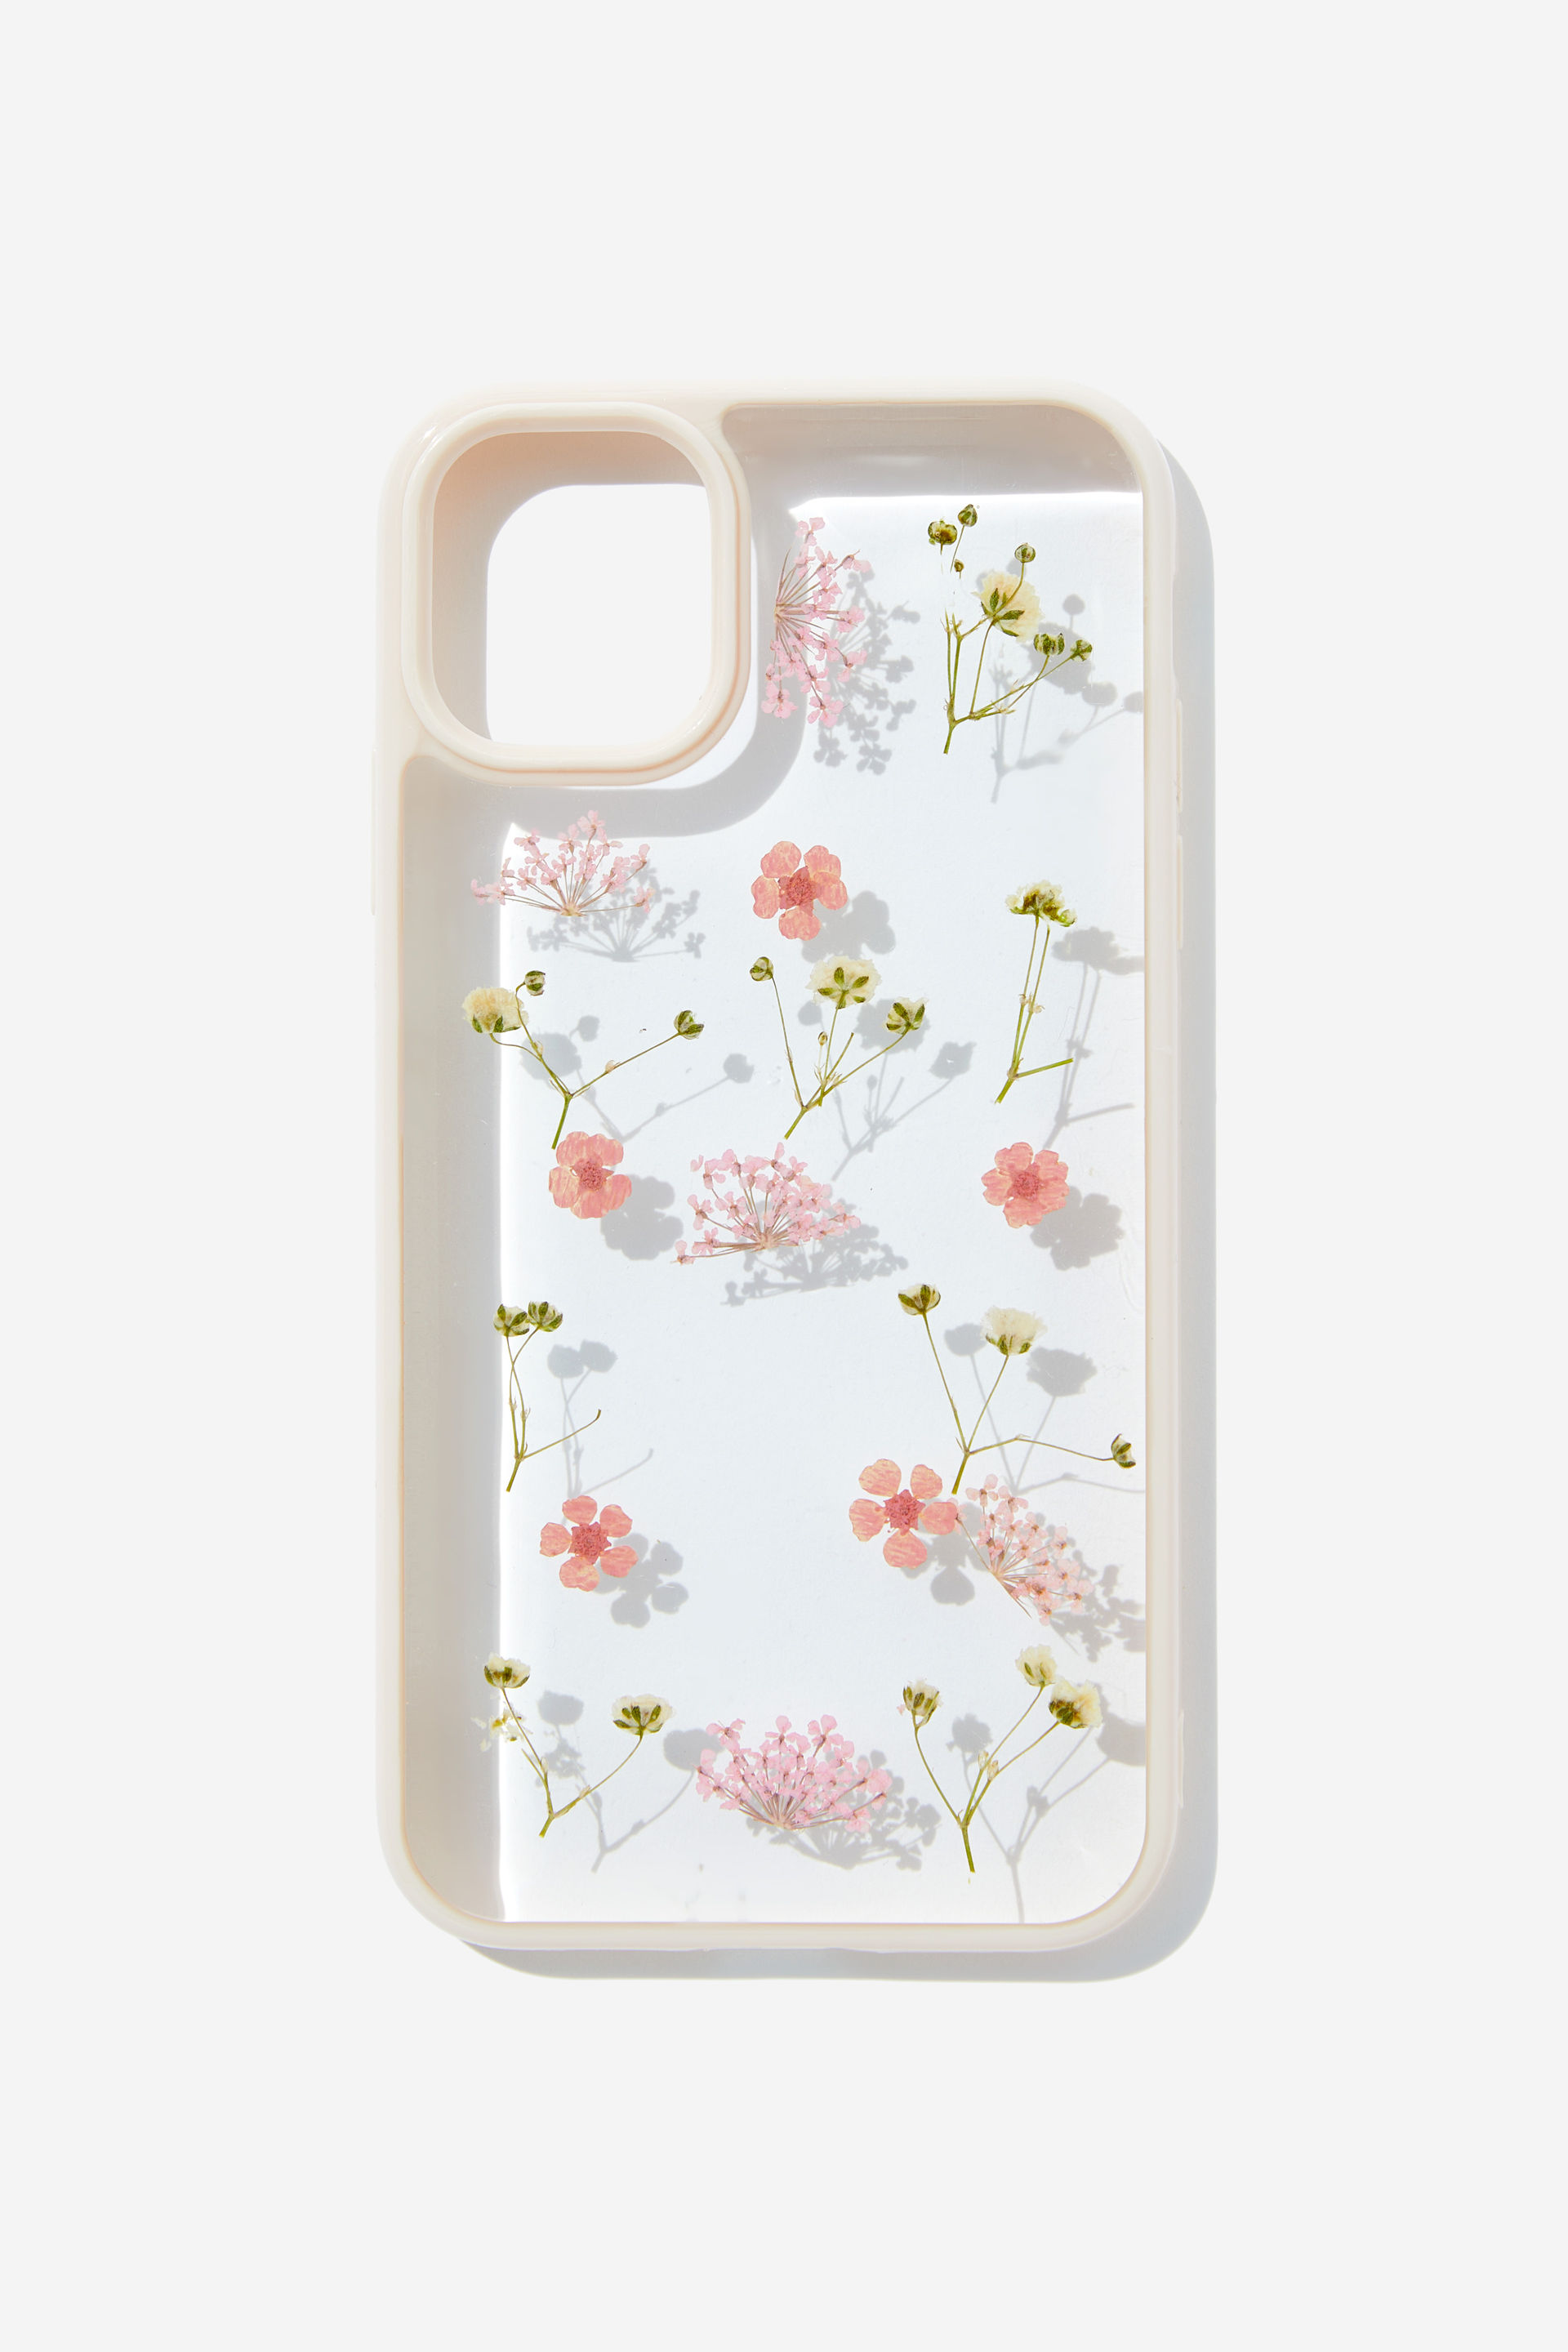 Typo - Protective Phone Case iPhone 11 - Trapped micro flower / ballet blush